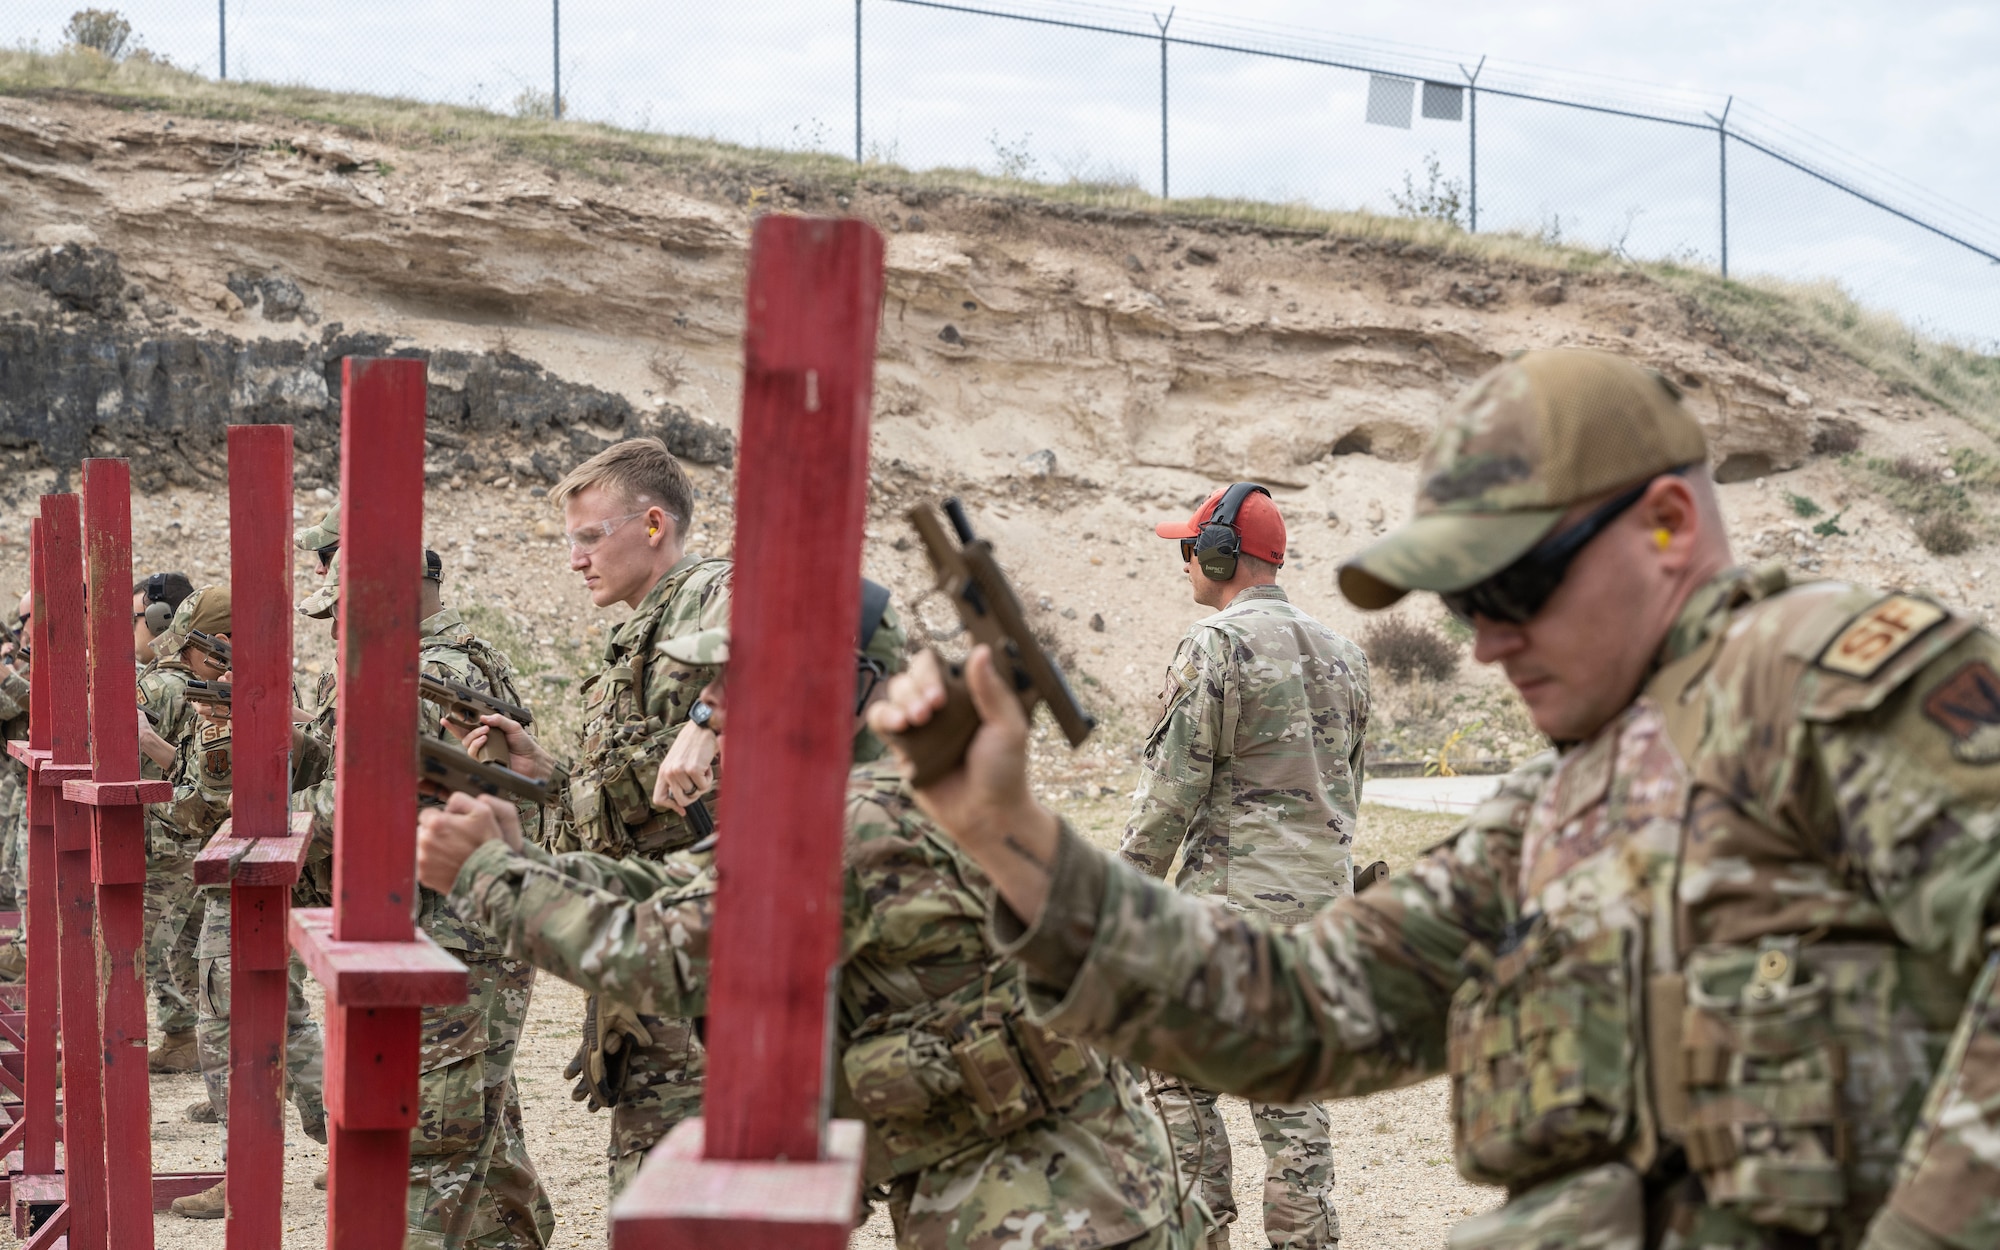 Multiple United States Air Force Security Forces Airmen stand behind individual mock barriers and shoot their side arms while an instructor wearing a red hat observes.